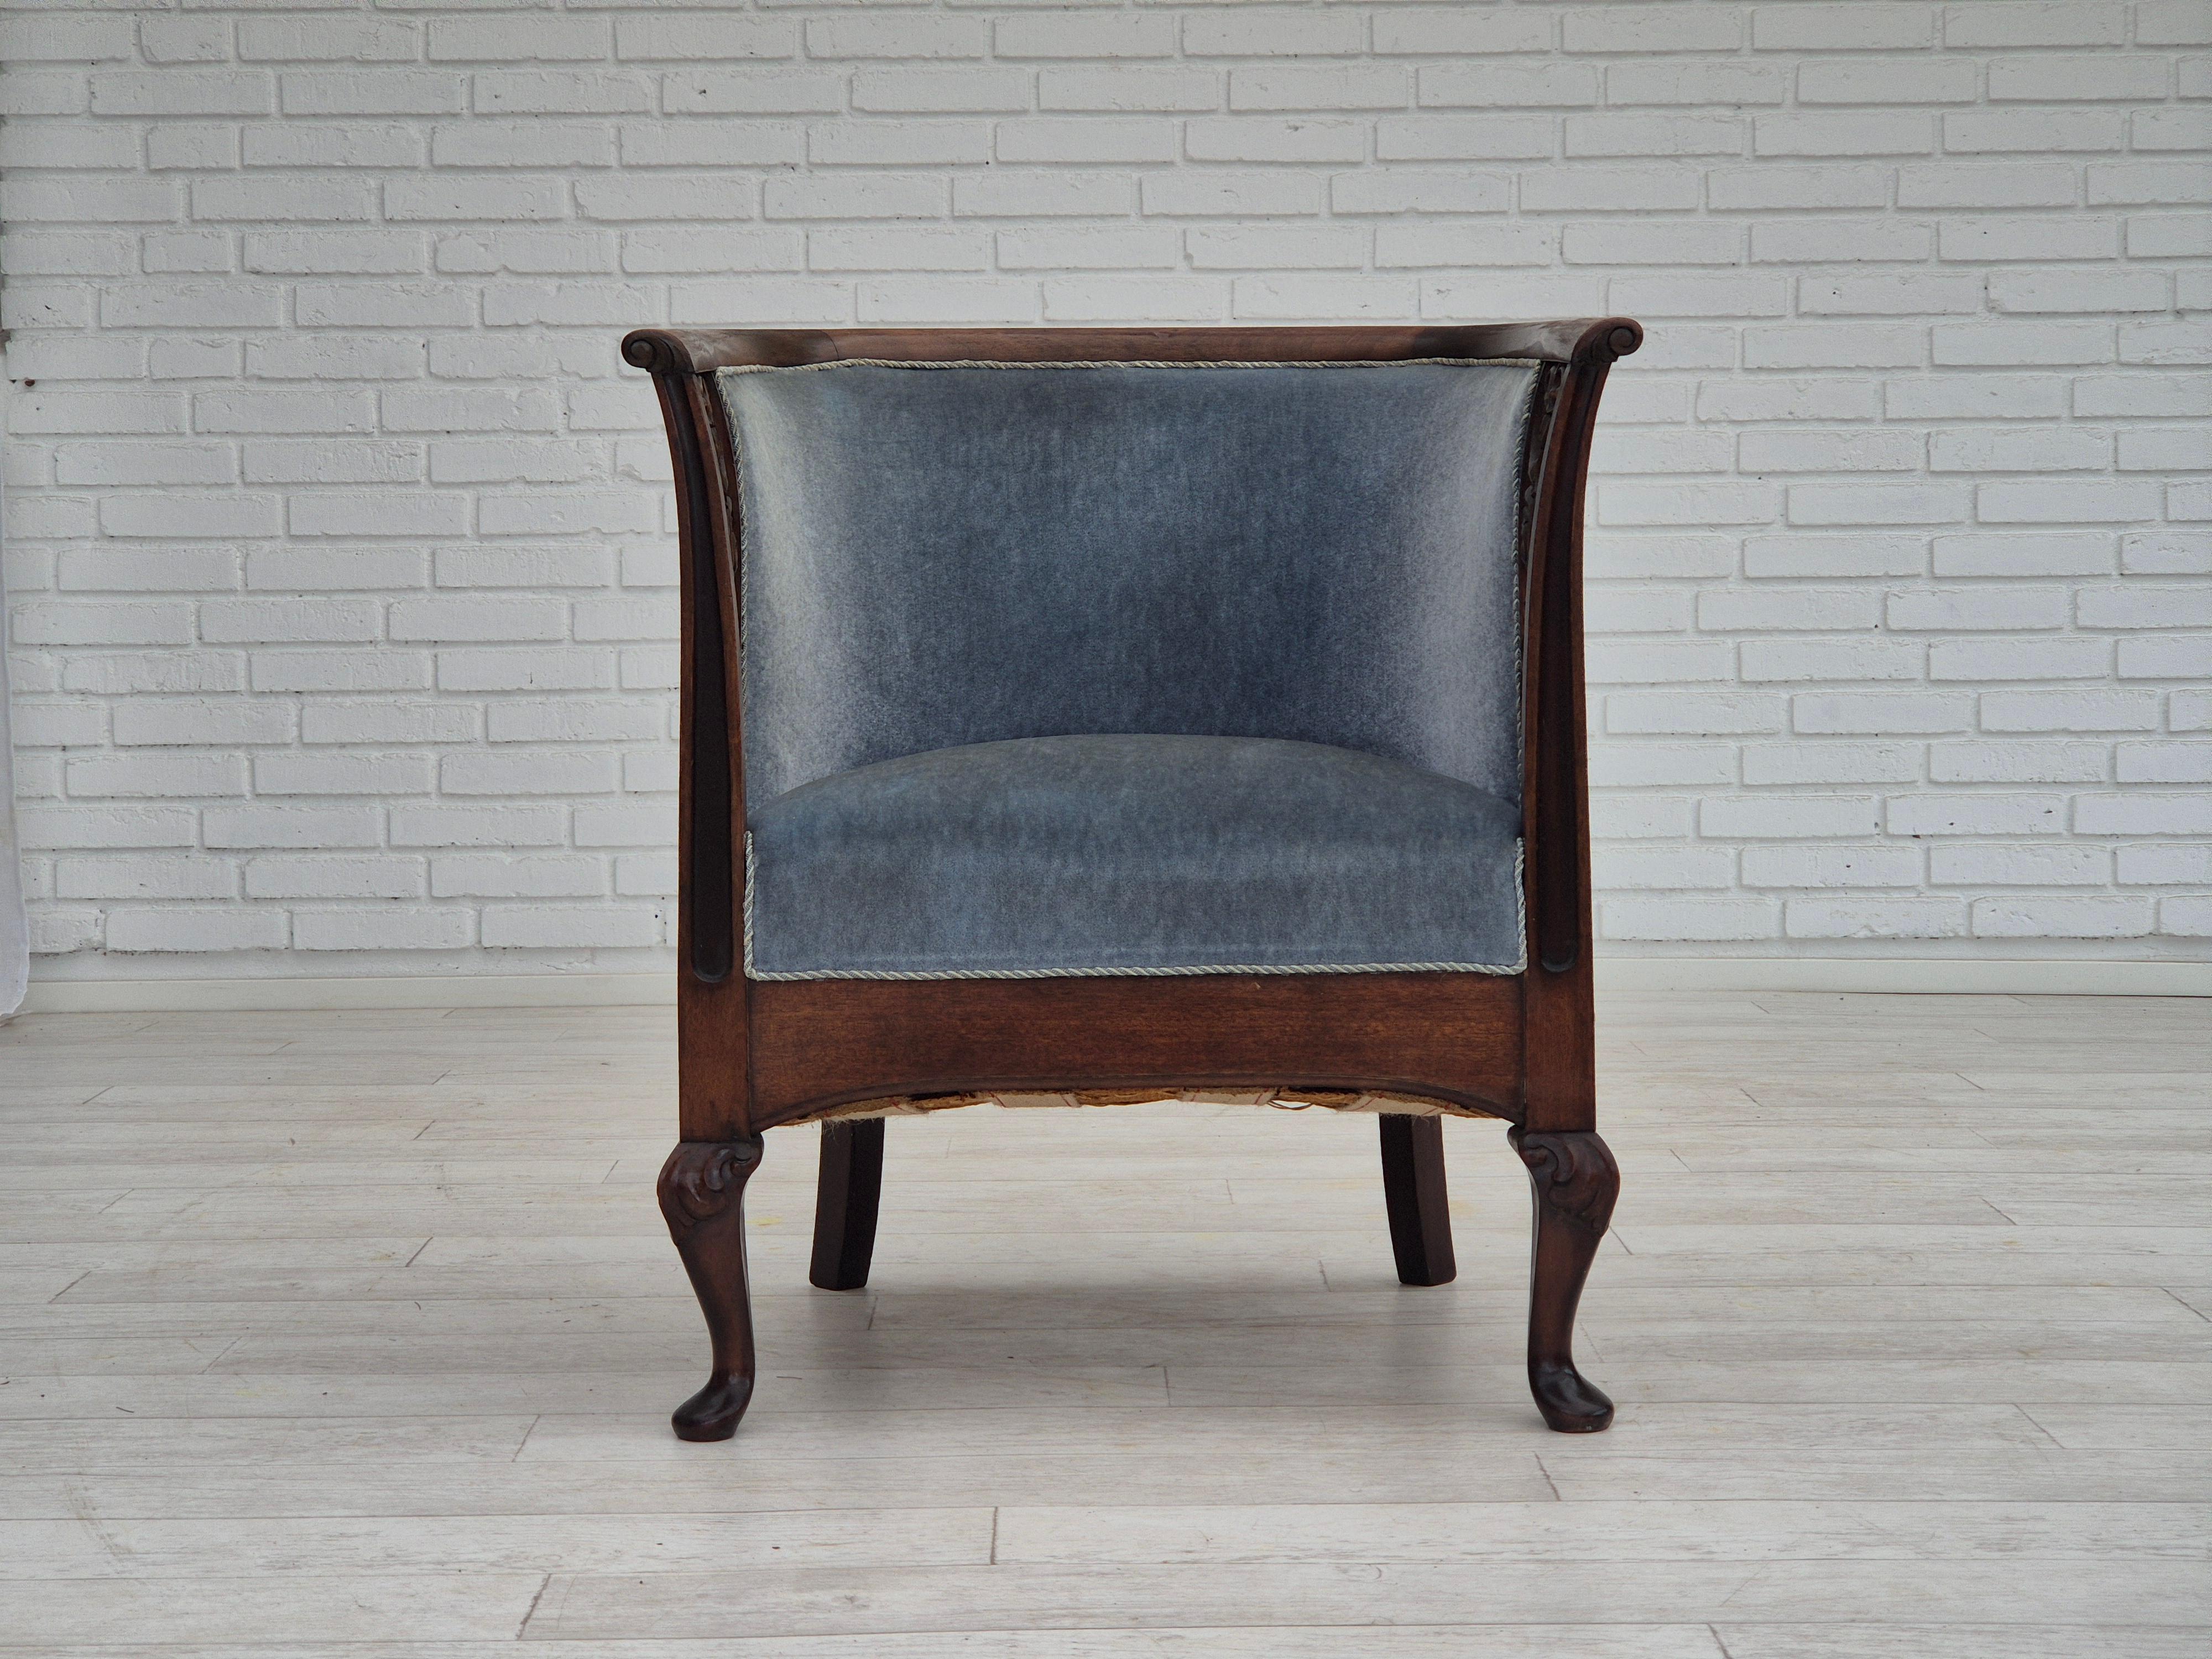 1950s, Danish design. Lounge chair in original very good condition: no smells and no stains. Hand-carved armrests. Original light blue furniture velour. Mahogany wood, brass springs in the seat. Manufactured by Danish furniture manufacturer in about